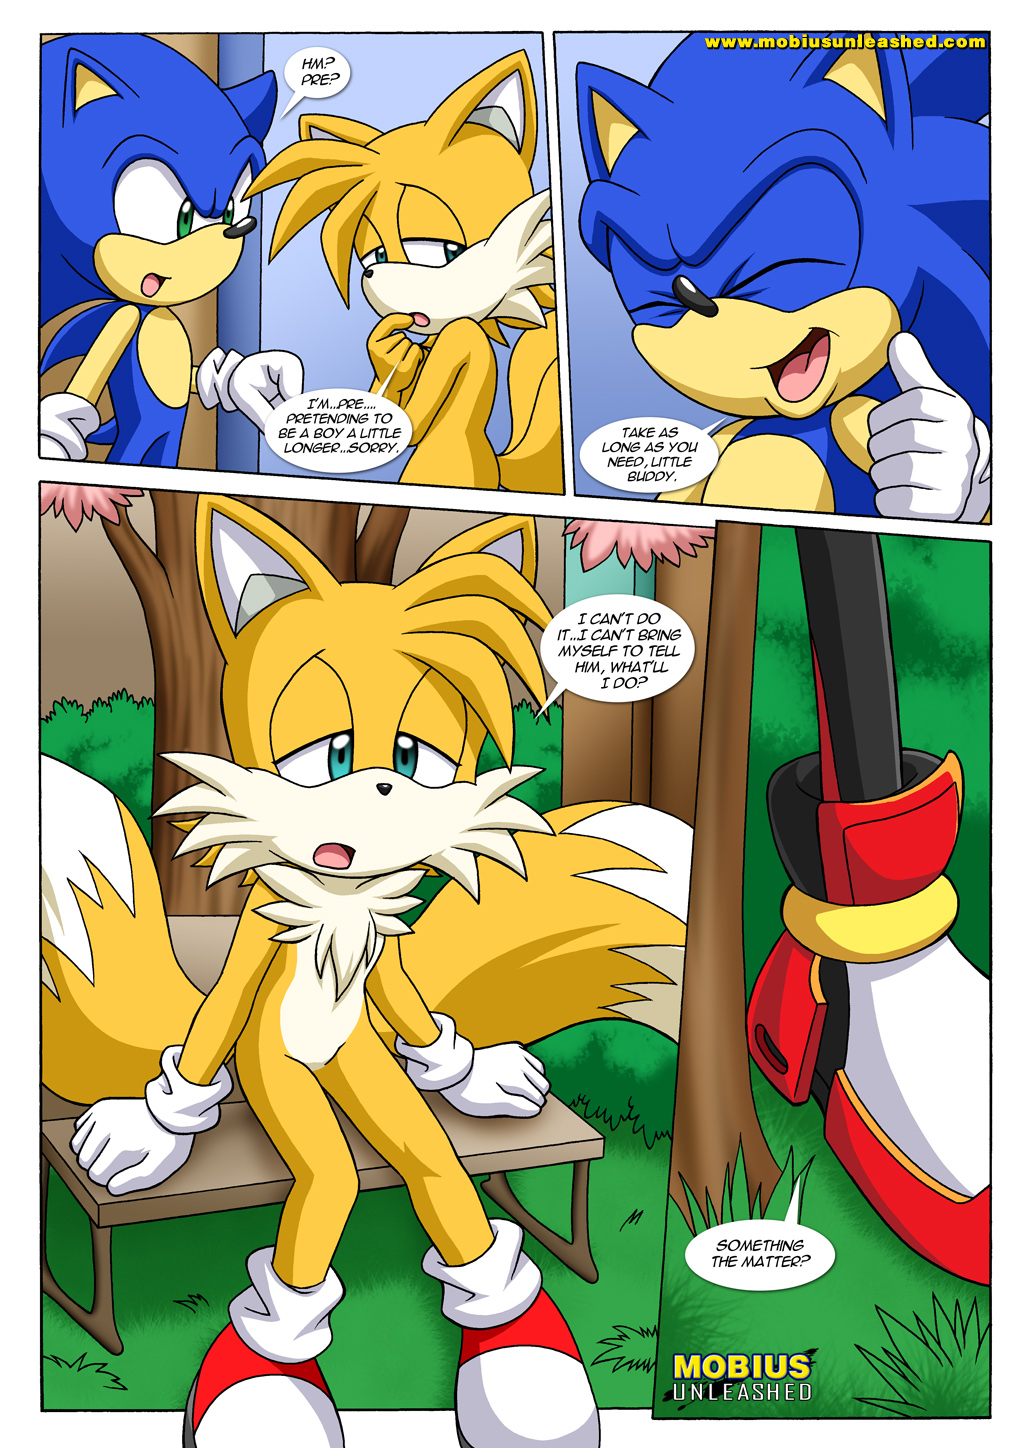 Read [palcomix] Tails Tales 2 Sonic The Hedgehog Hentai Online Porn Manga And Doujinshi